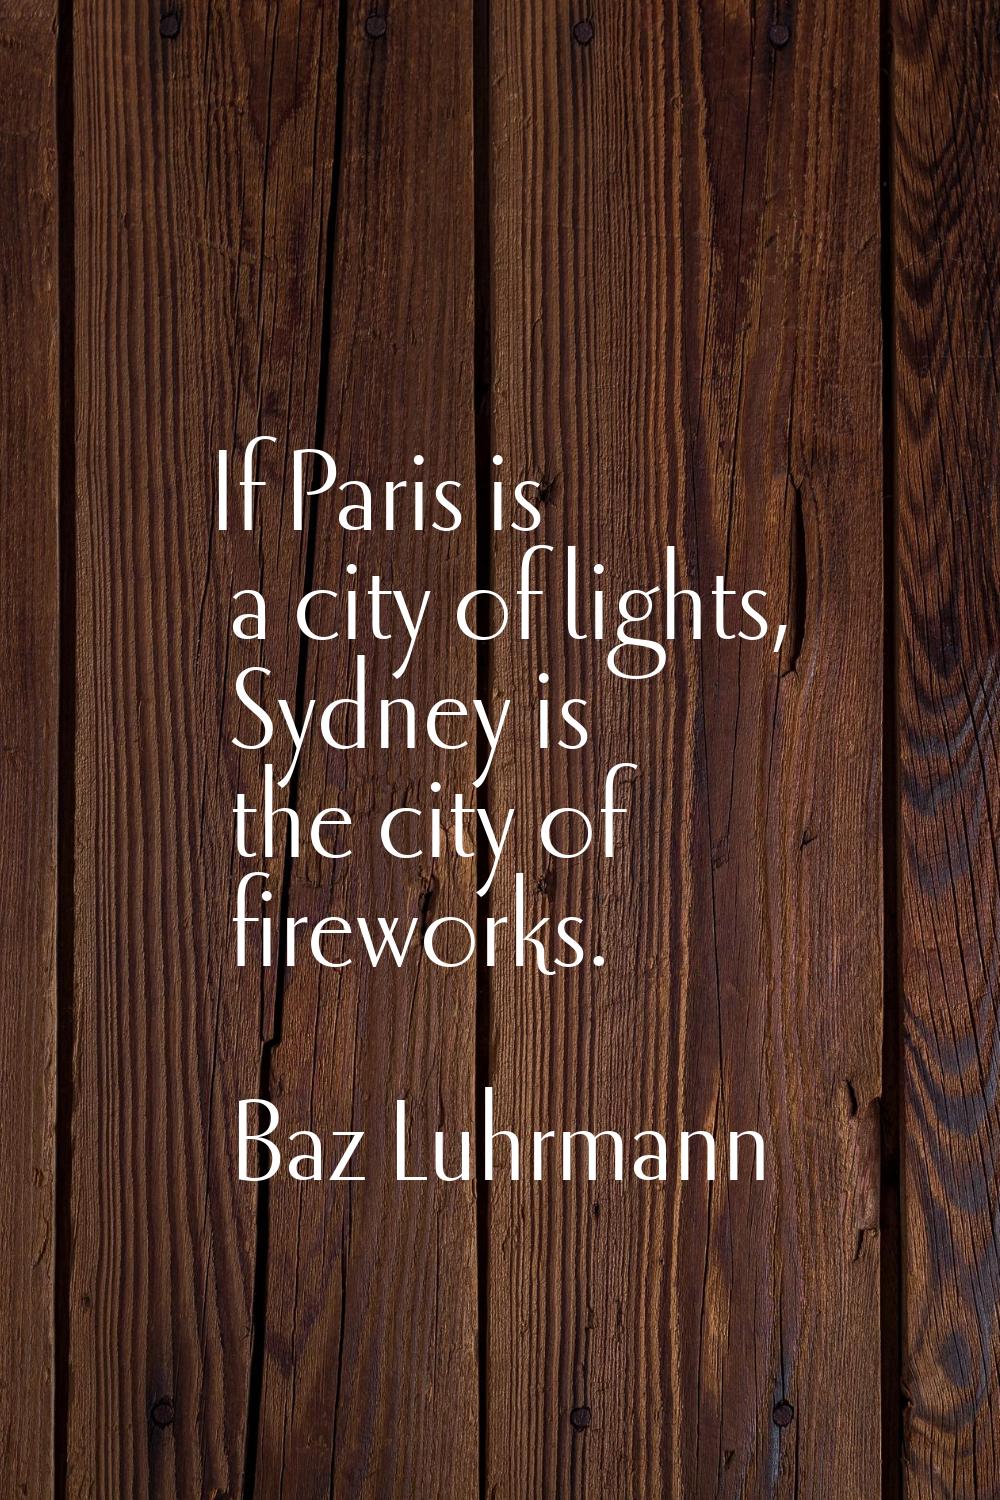 If Paris is a city of lights, Sydney is the city of fireworks.